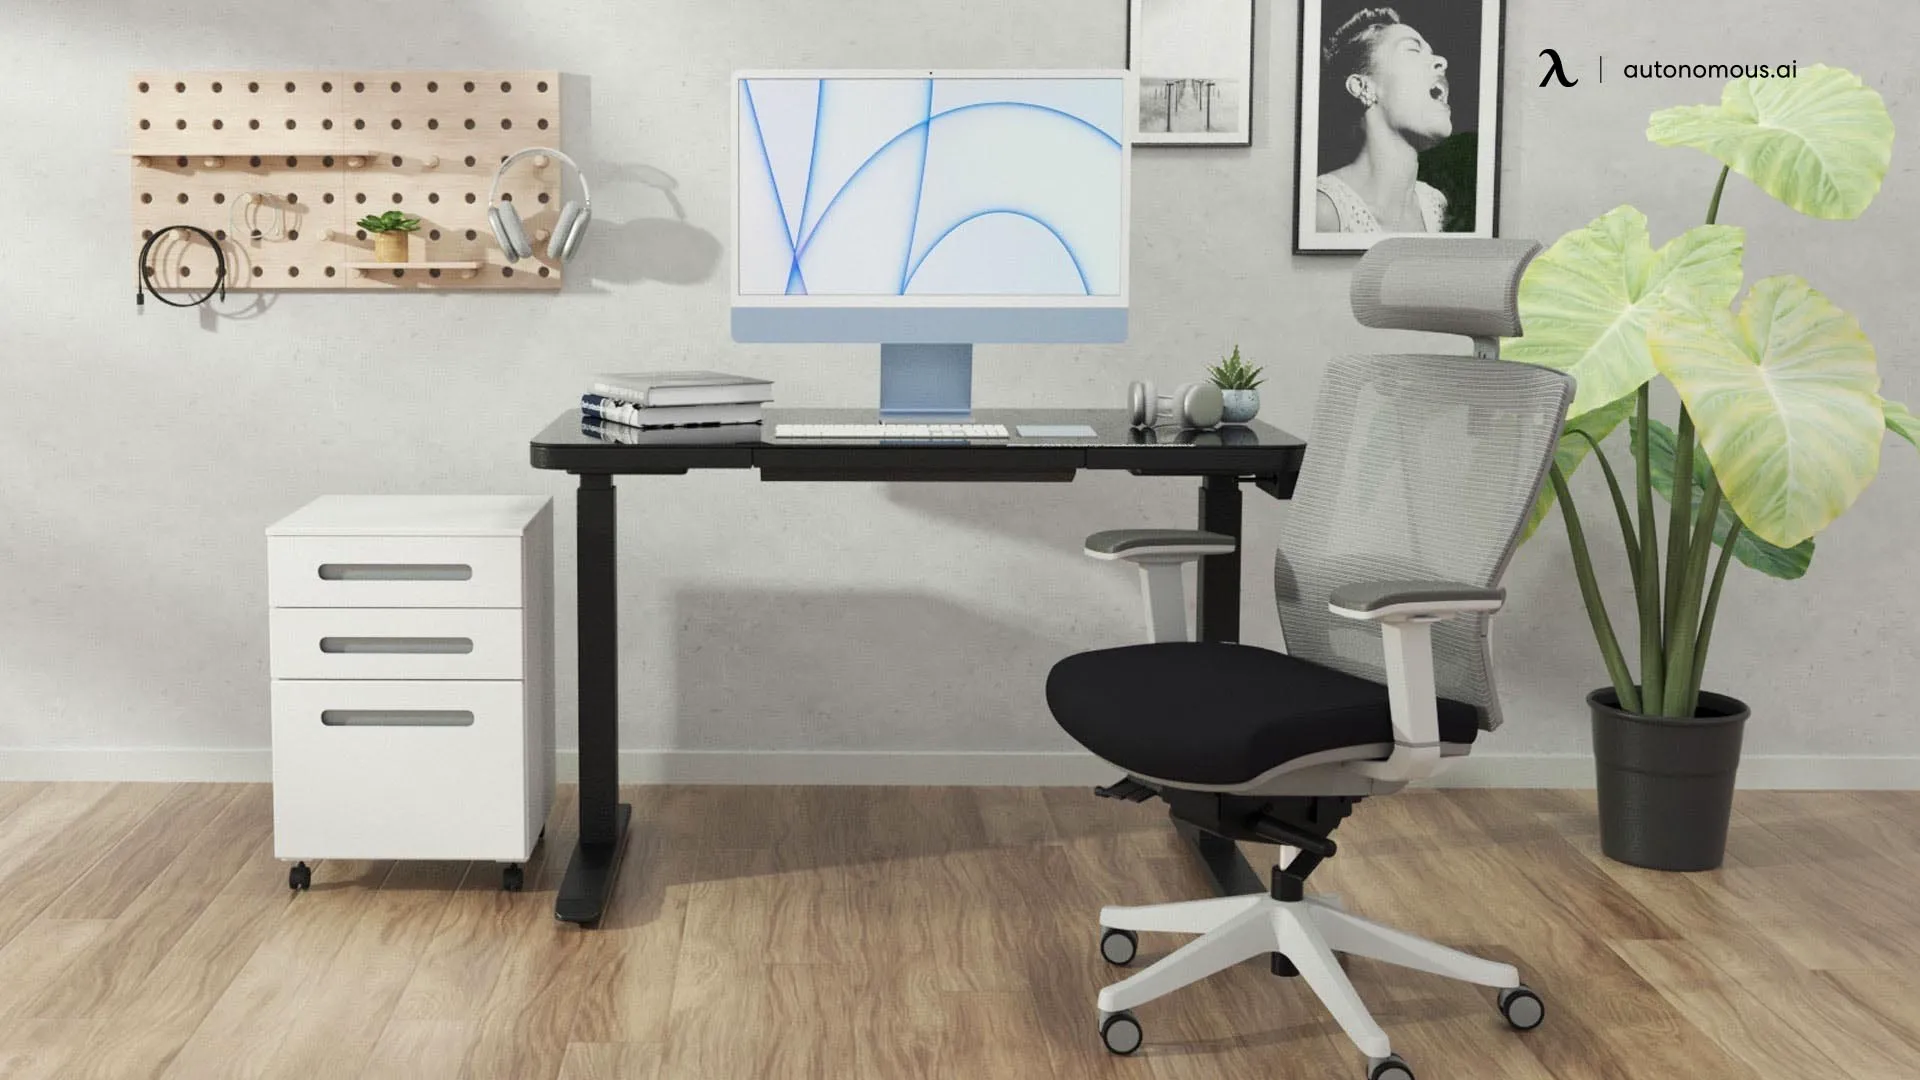 Make Your Workstation More Personal by Adding New Elements